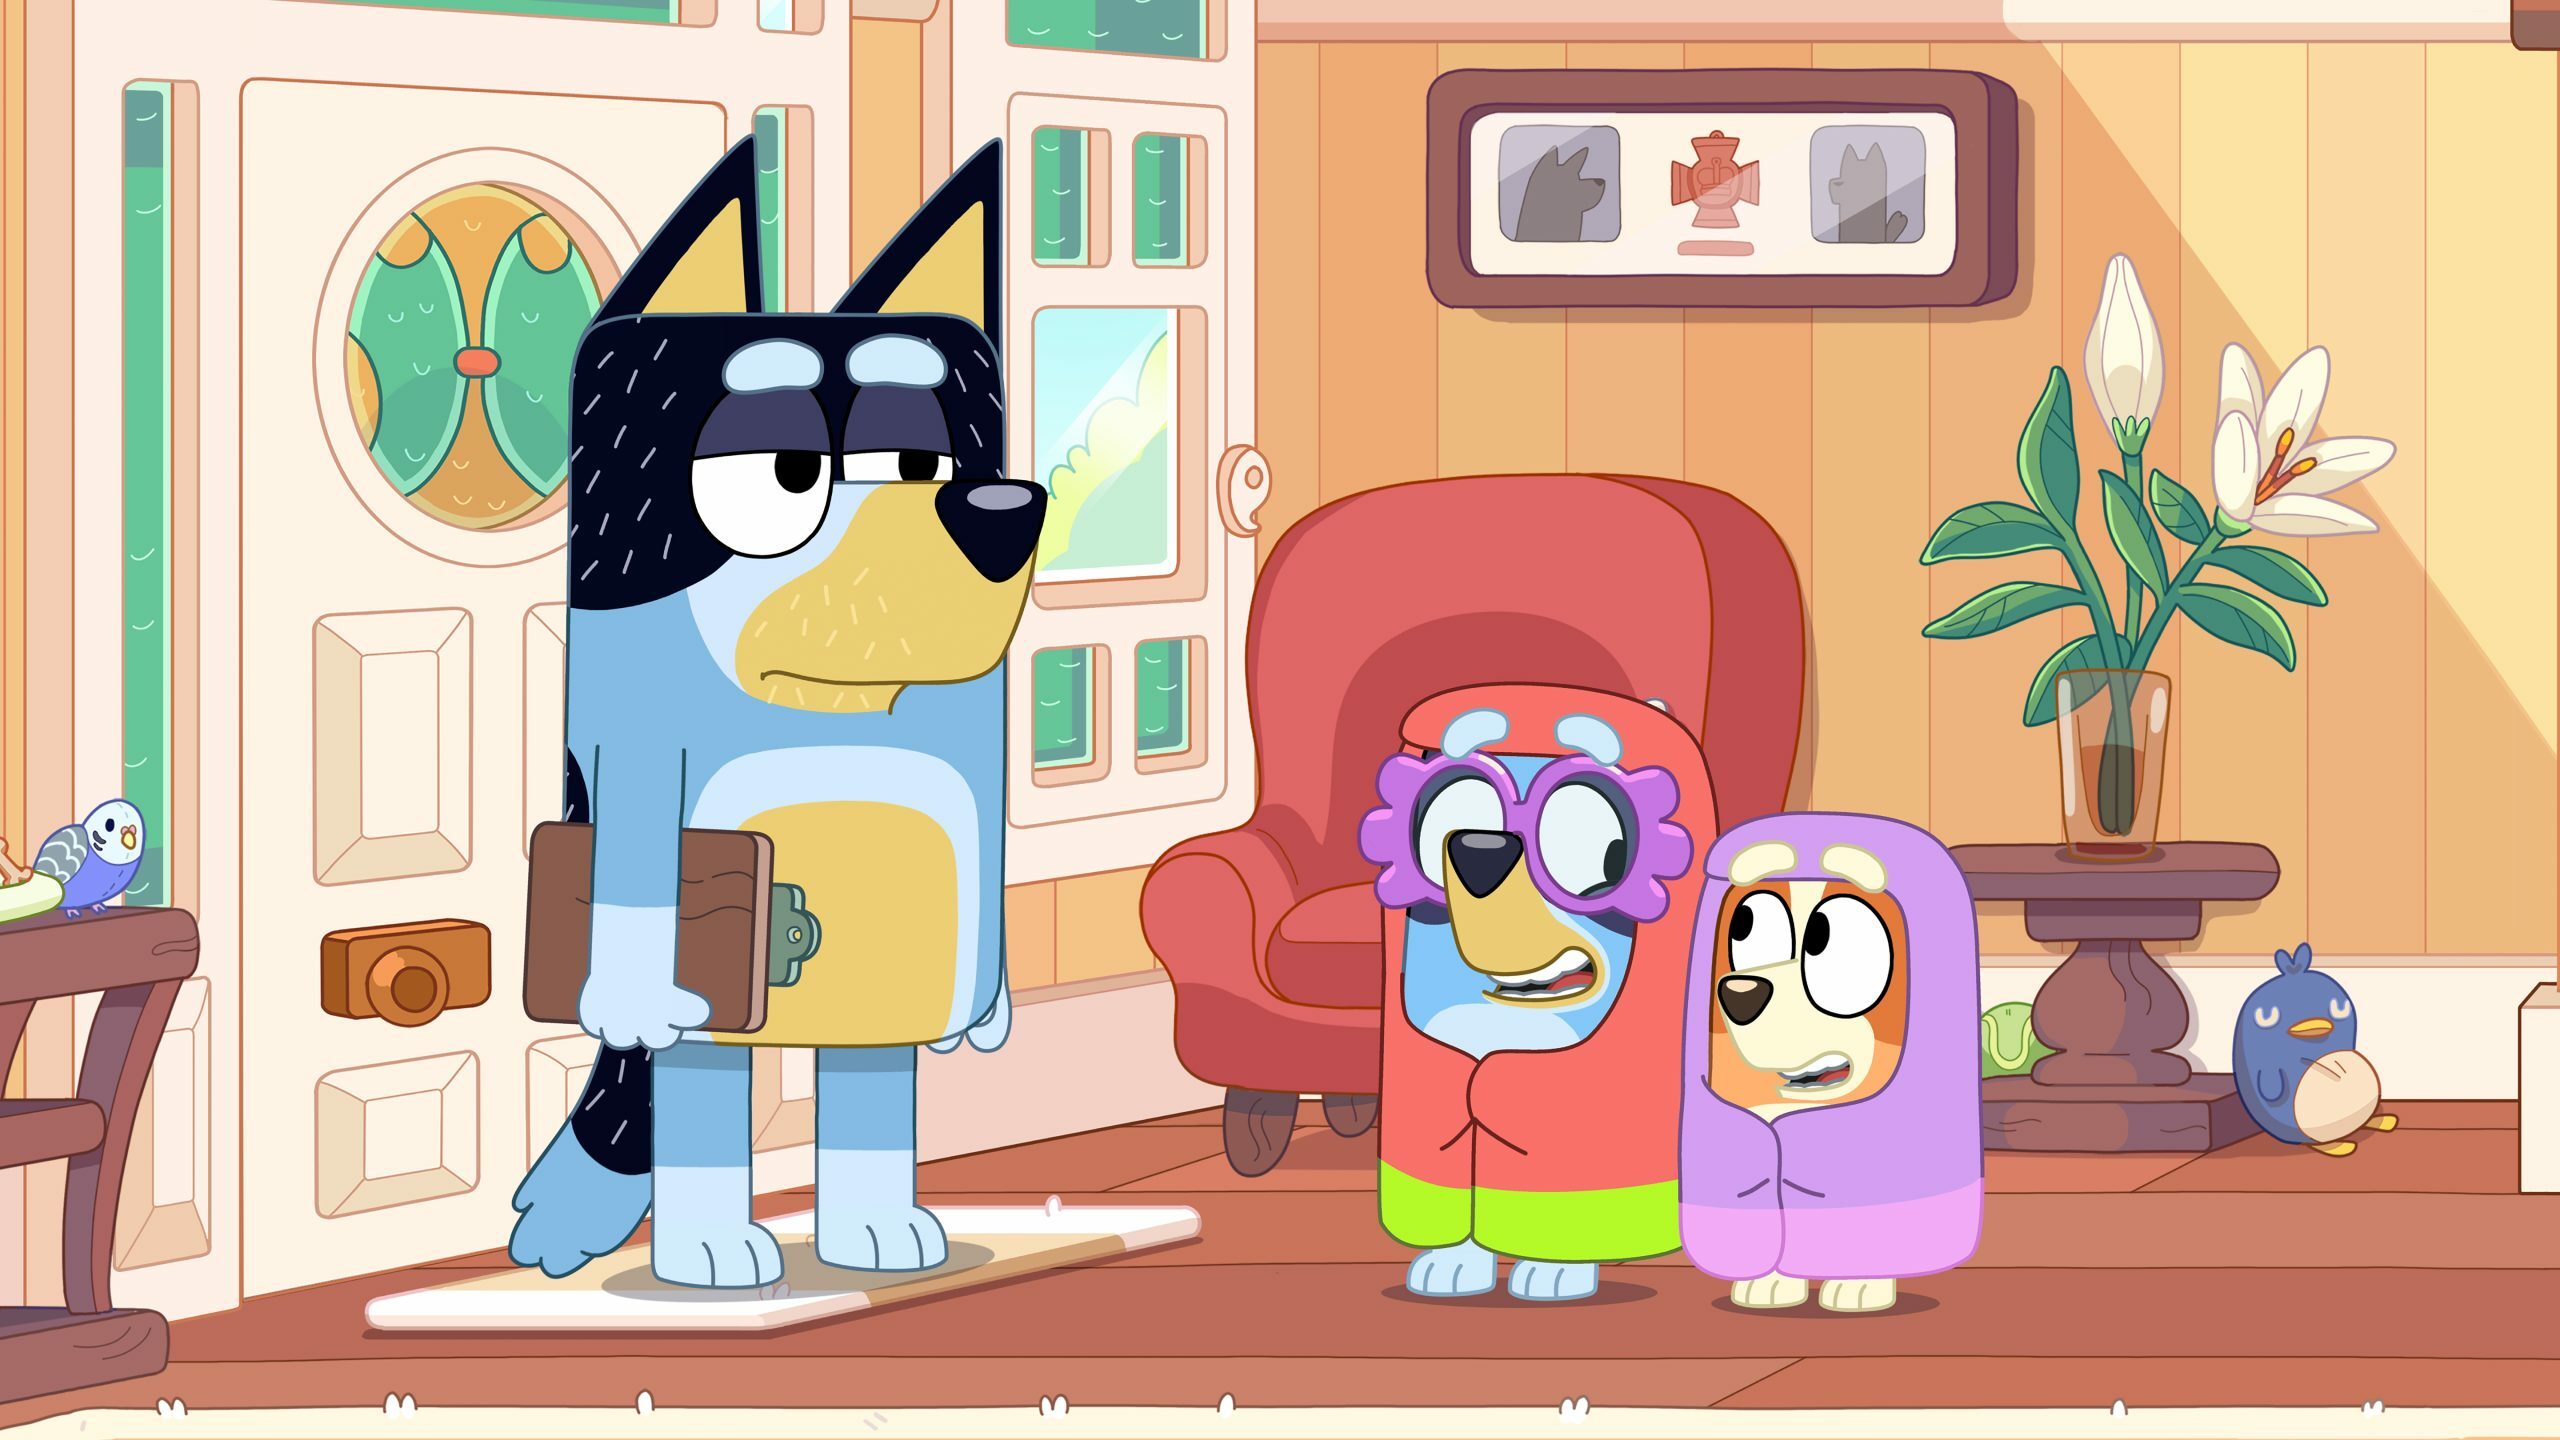 Bandit holding a clipboard while Bluey and Bingo are dressed as grannies in 'Bluey.'